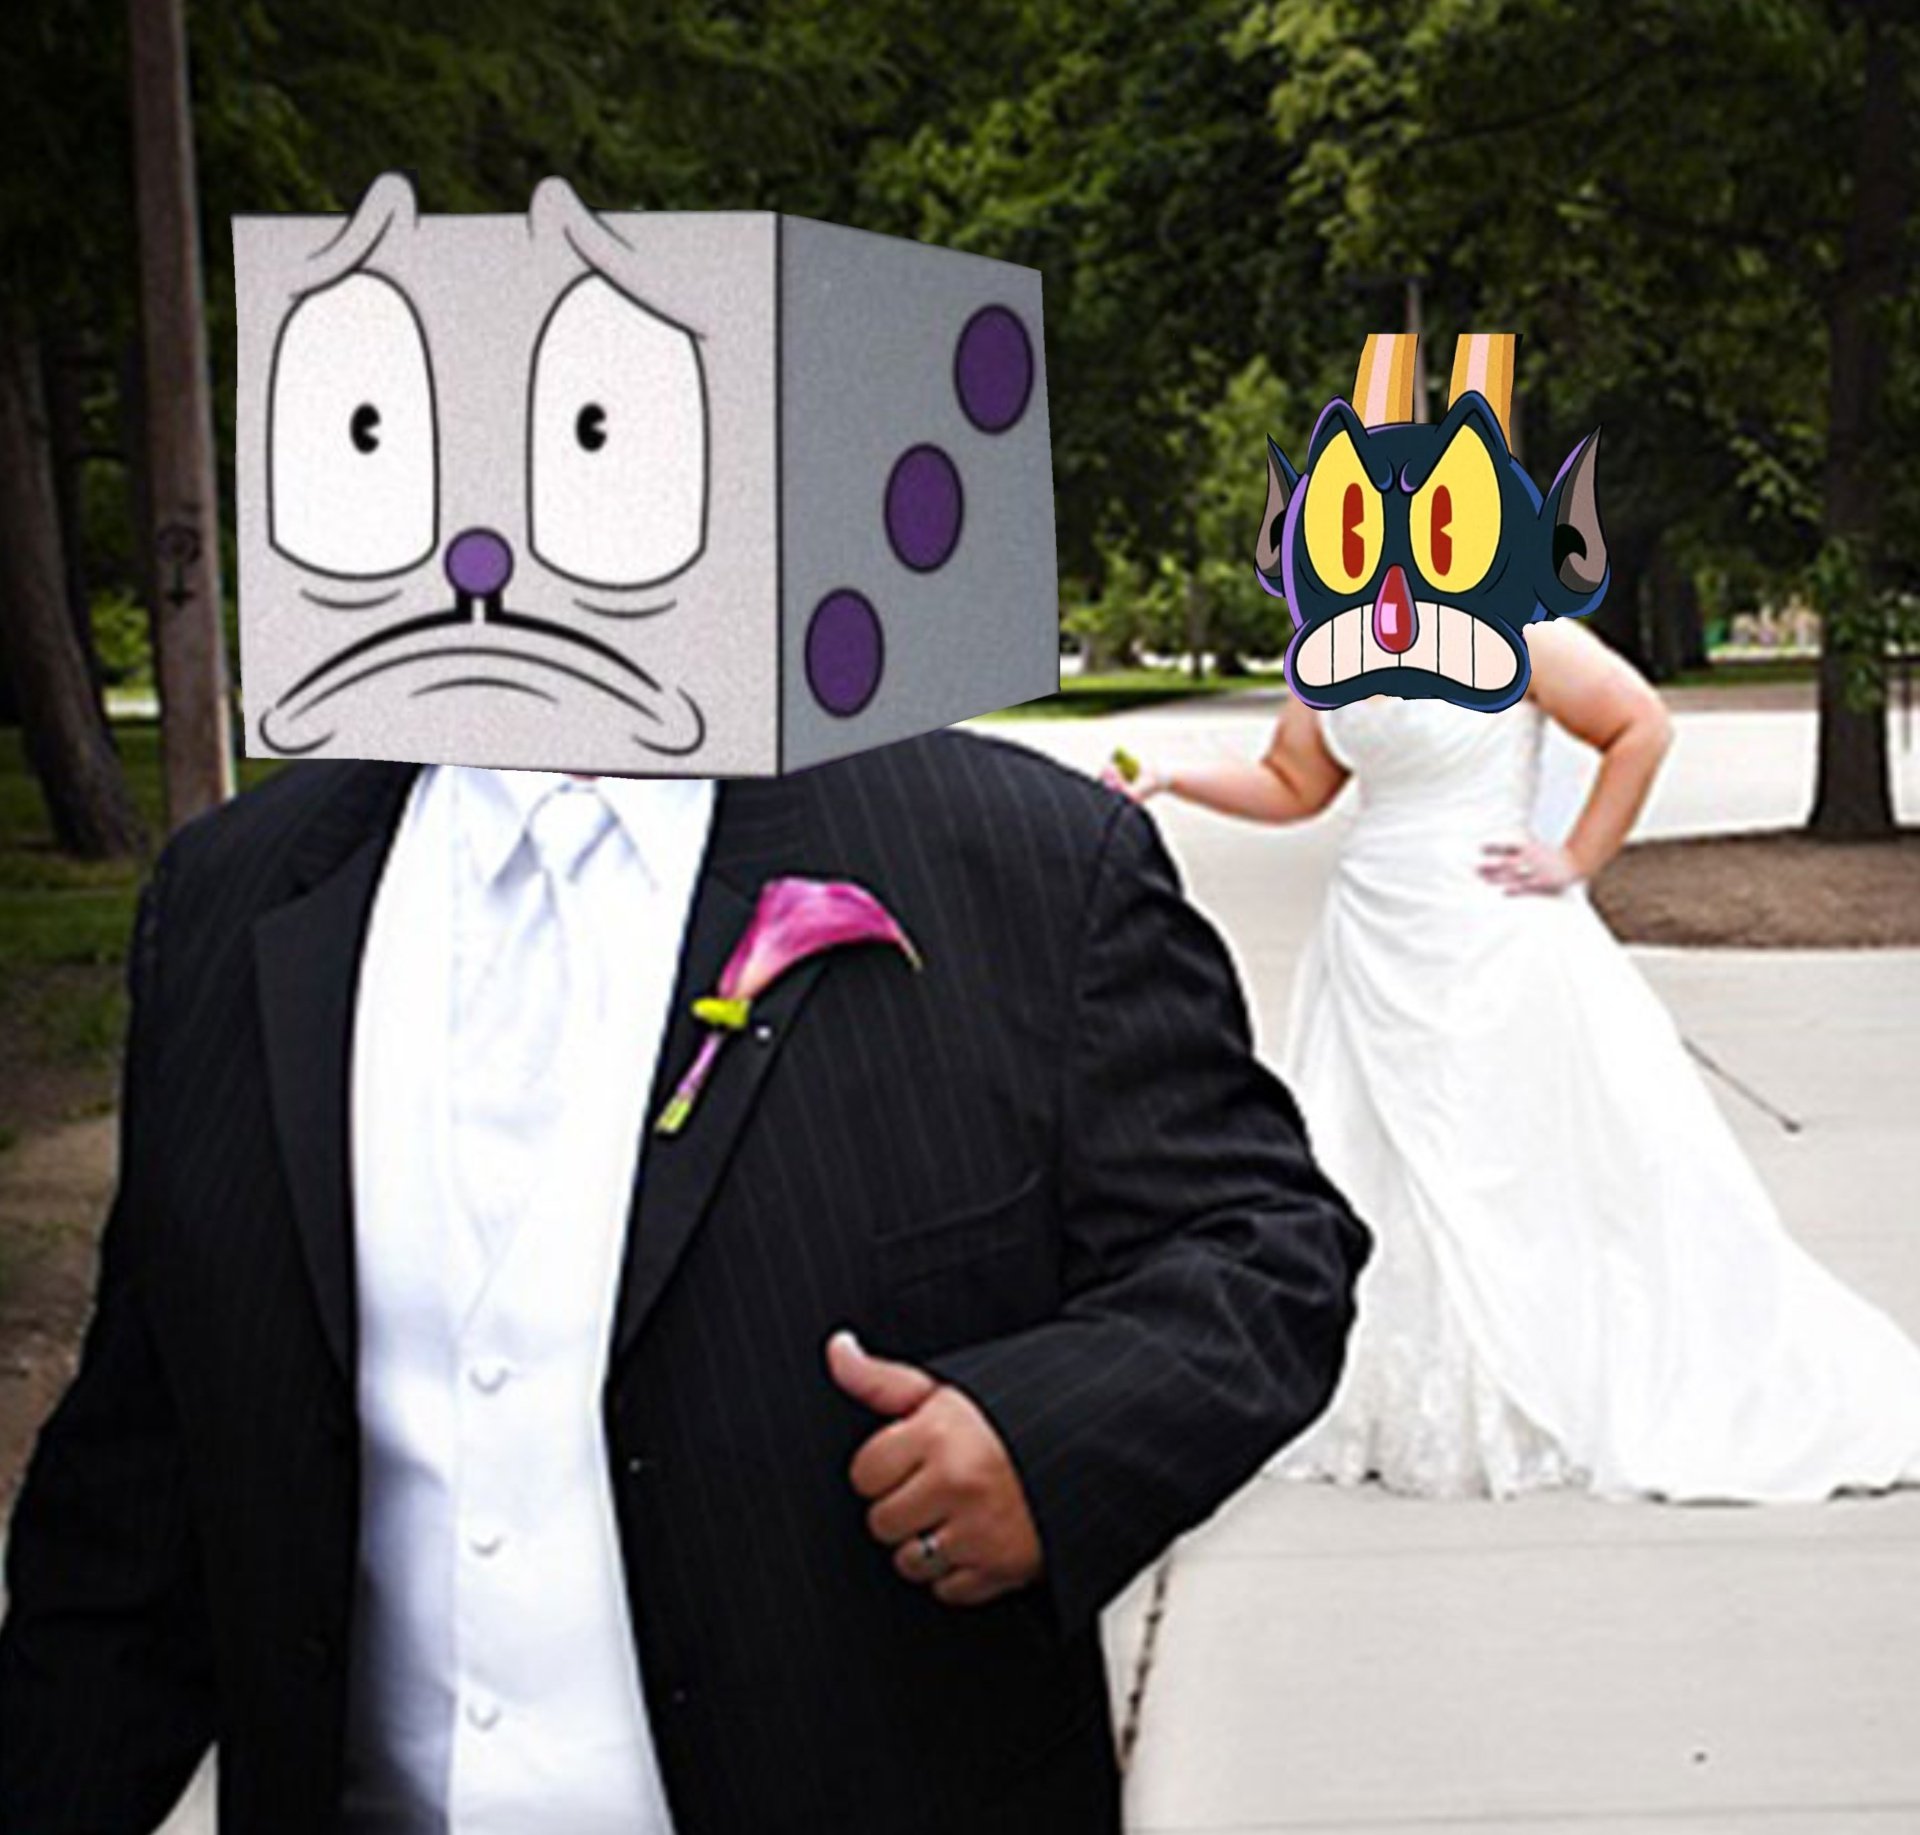 A cosplayer dressed as King Dice from the video games Cuphead